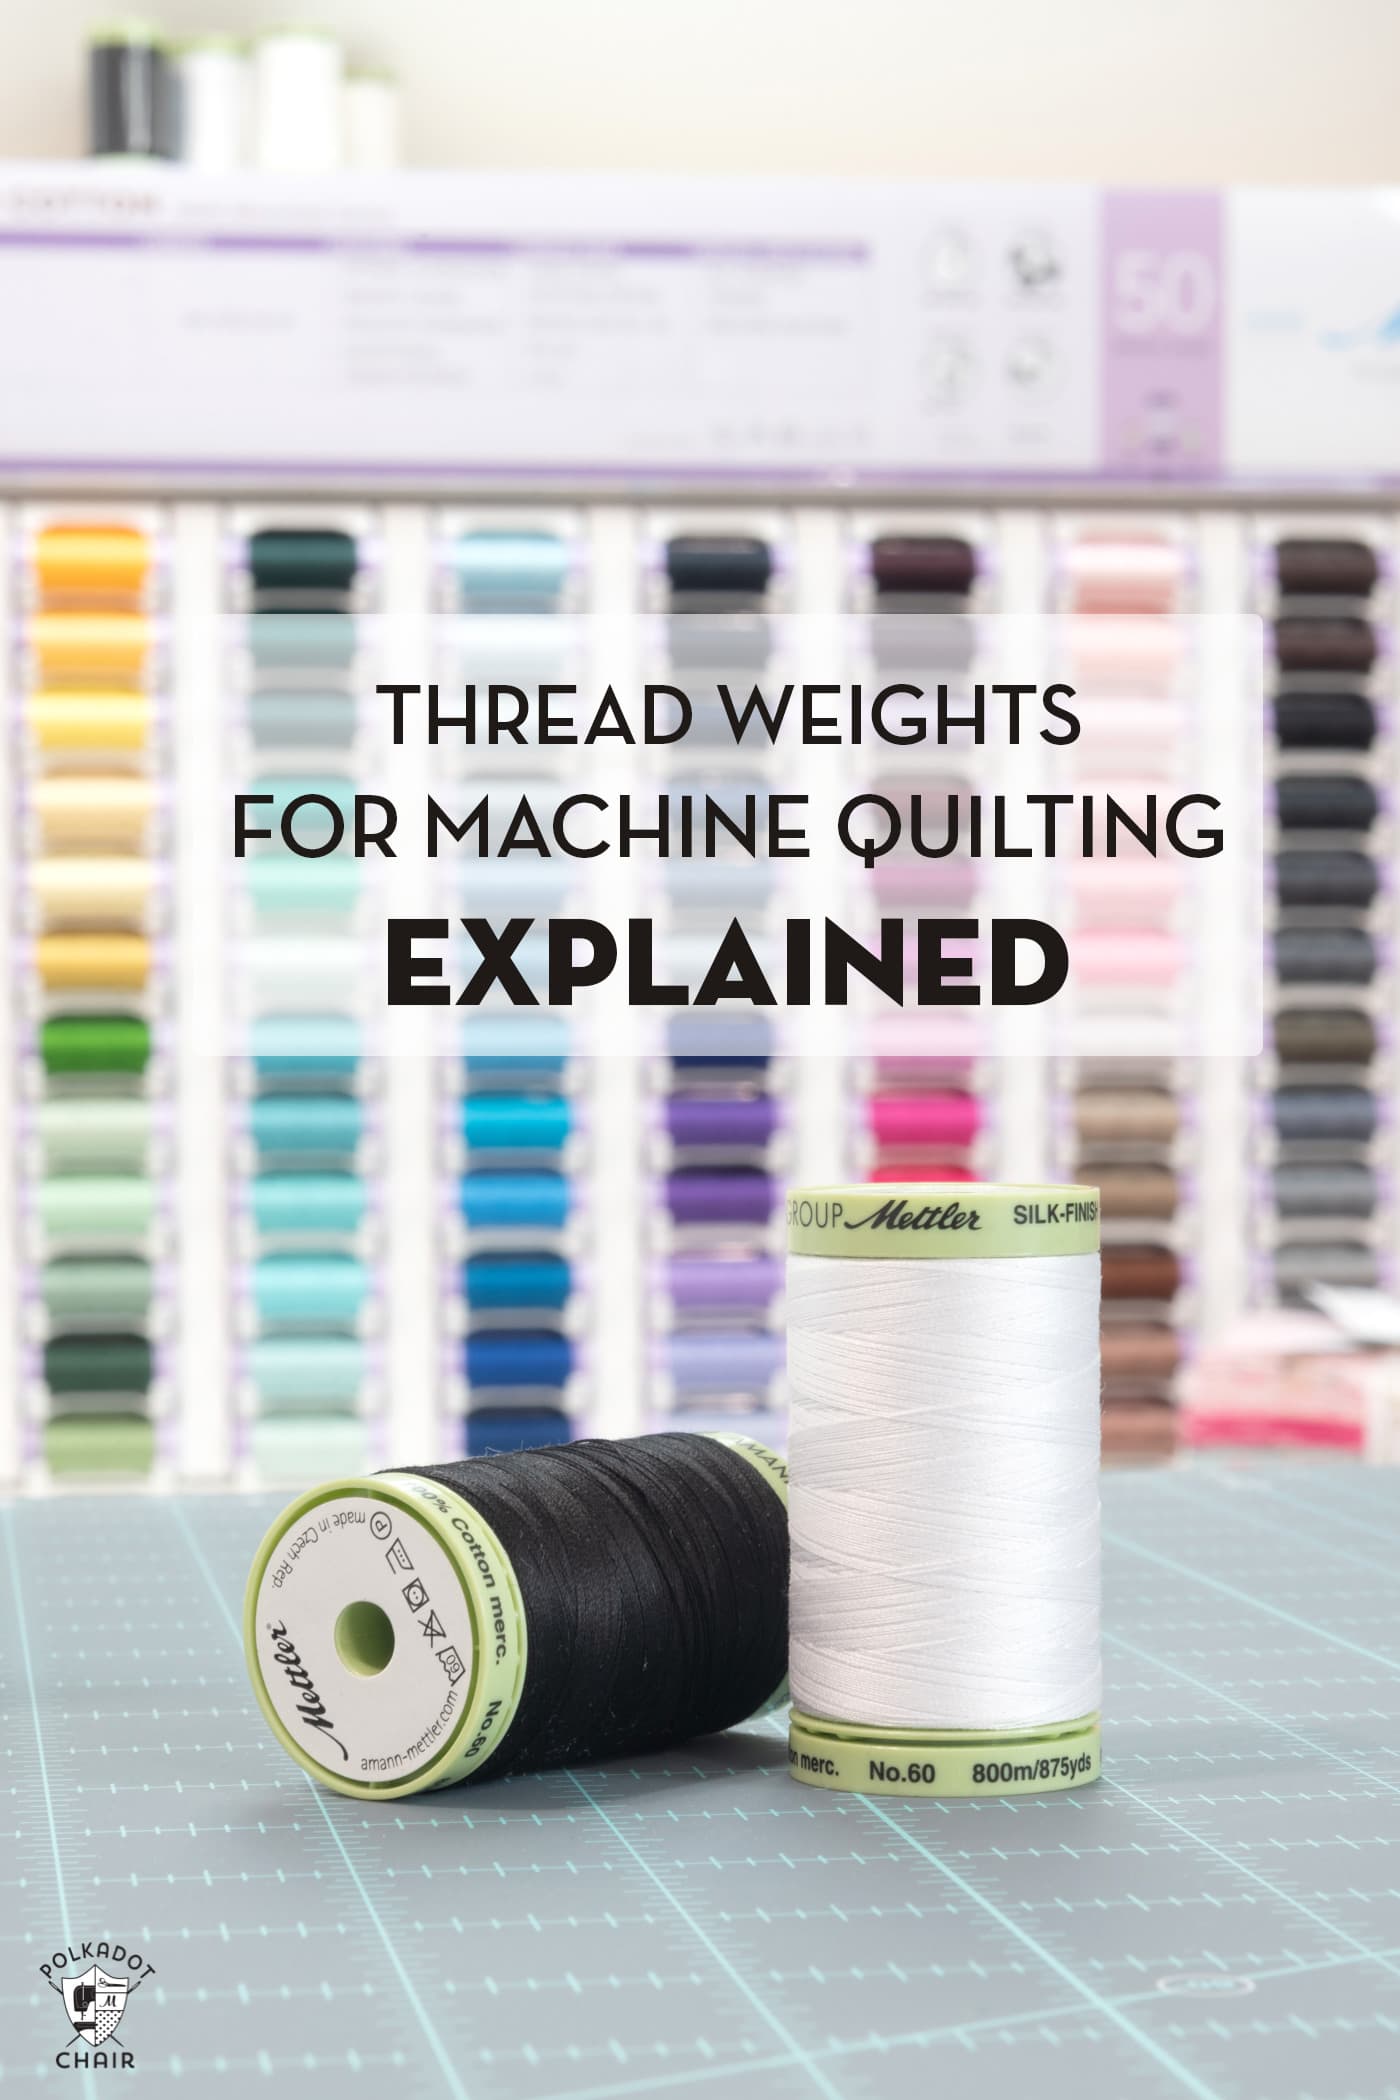 Thread Weights Used In Machine Quilting Explained - The Polka Dot